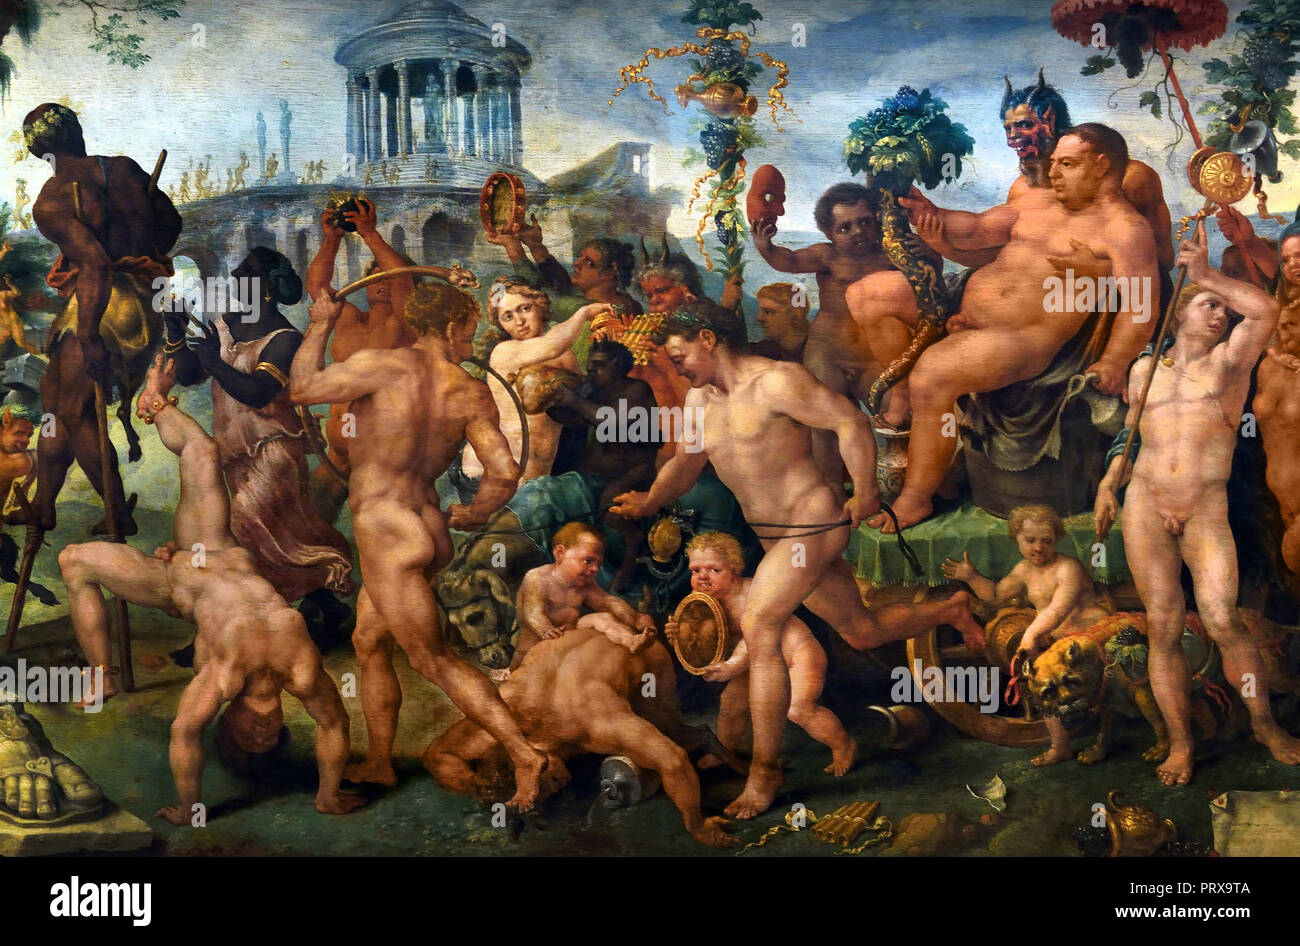 The Triumphal Procession of Bacchus 1536 - 1537 Martin- Maerten van Heemskerck 1498-1574 active Haarlem - Rome Dutch The Netherlands ( Bacchus was the Roman god of agriculture, wine and fertility, copied from the Greek god Dionysus.  ) Stock Photo